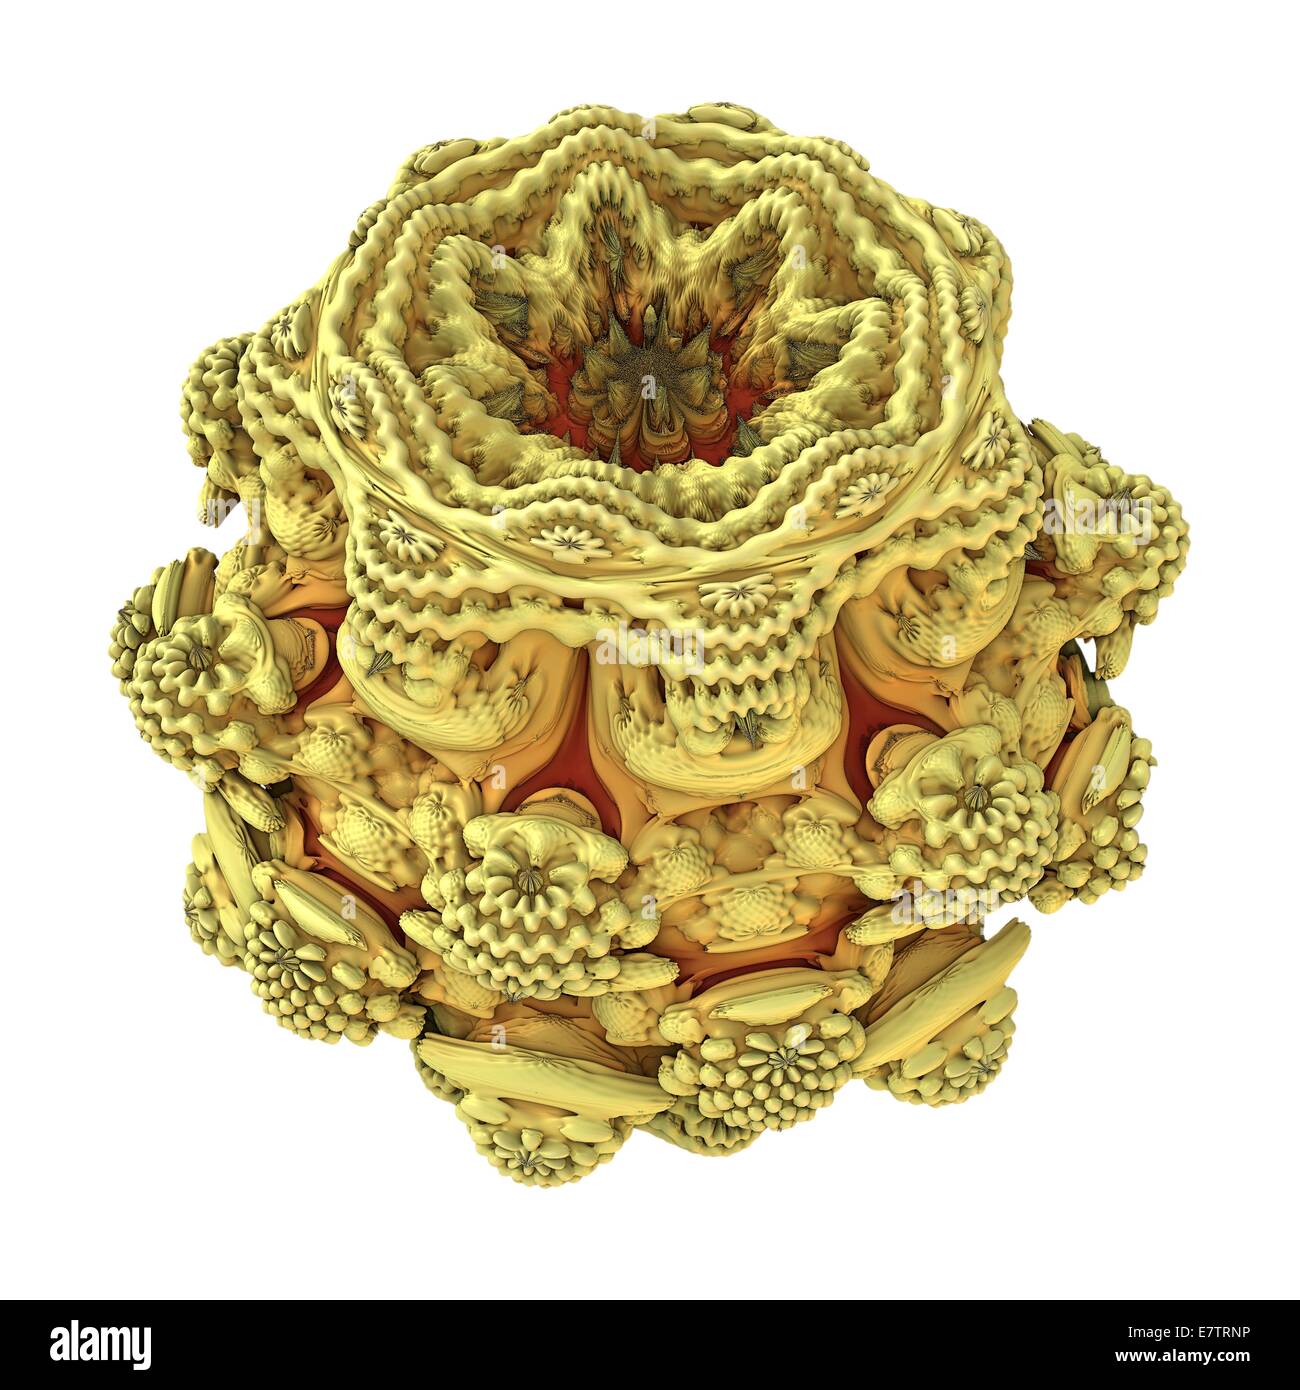 Mandelbulb fractal. Computer-generated image of a three-dimensional analogue derived form a Mandelbrot Set. Stock Photo